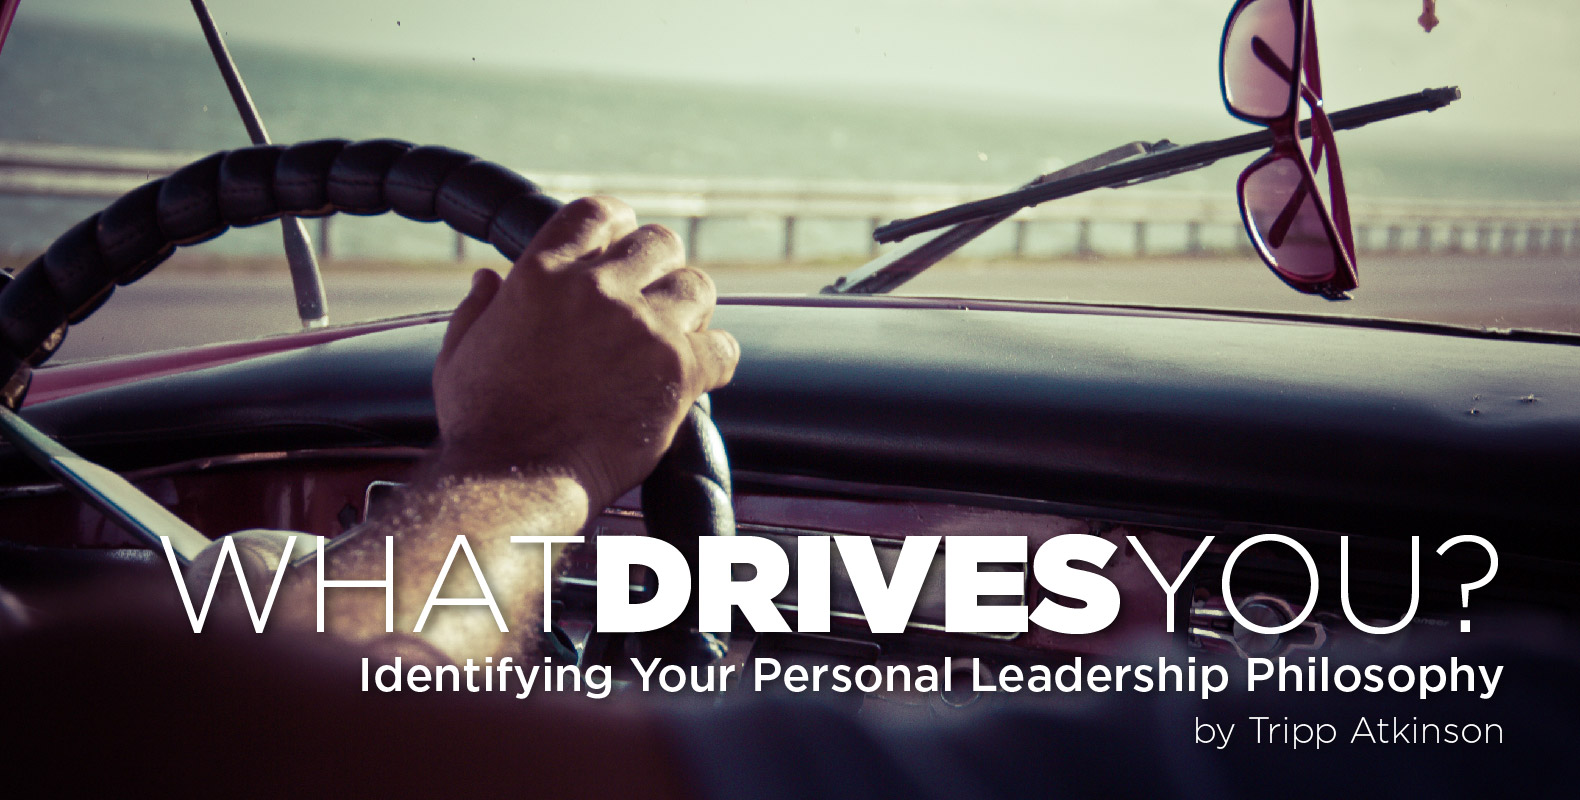 Tripp Atkinson "What Drives You" Identifying Your Personal Leadership Philosophy